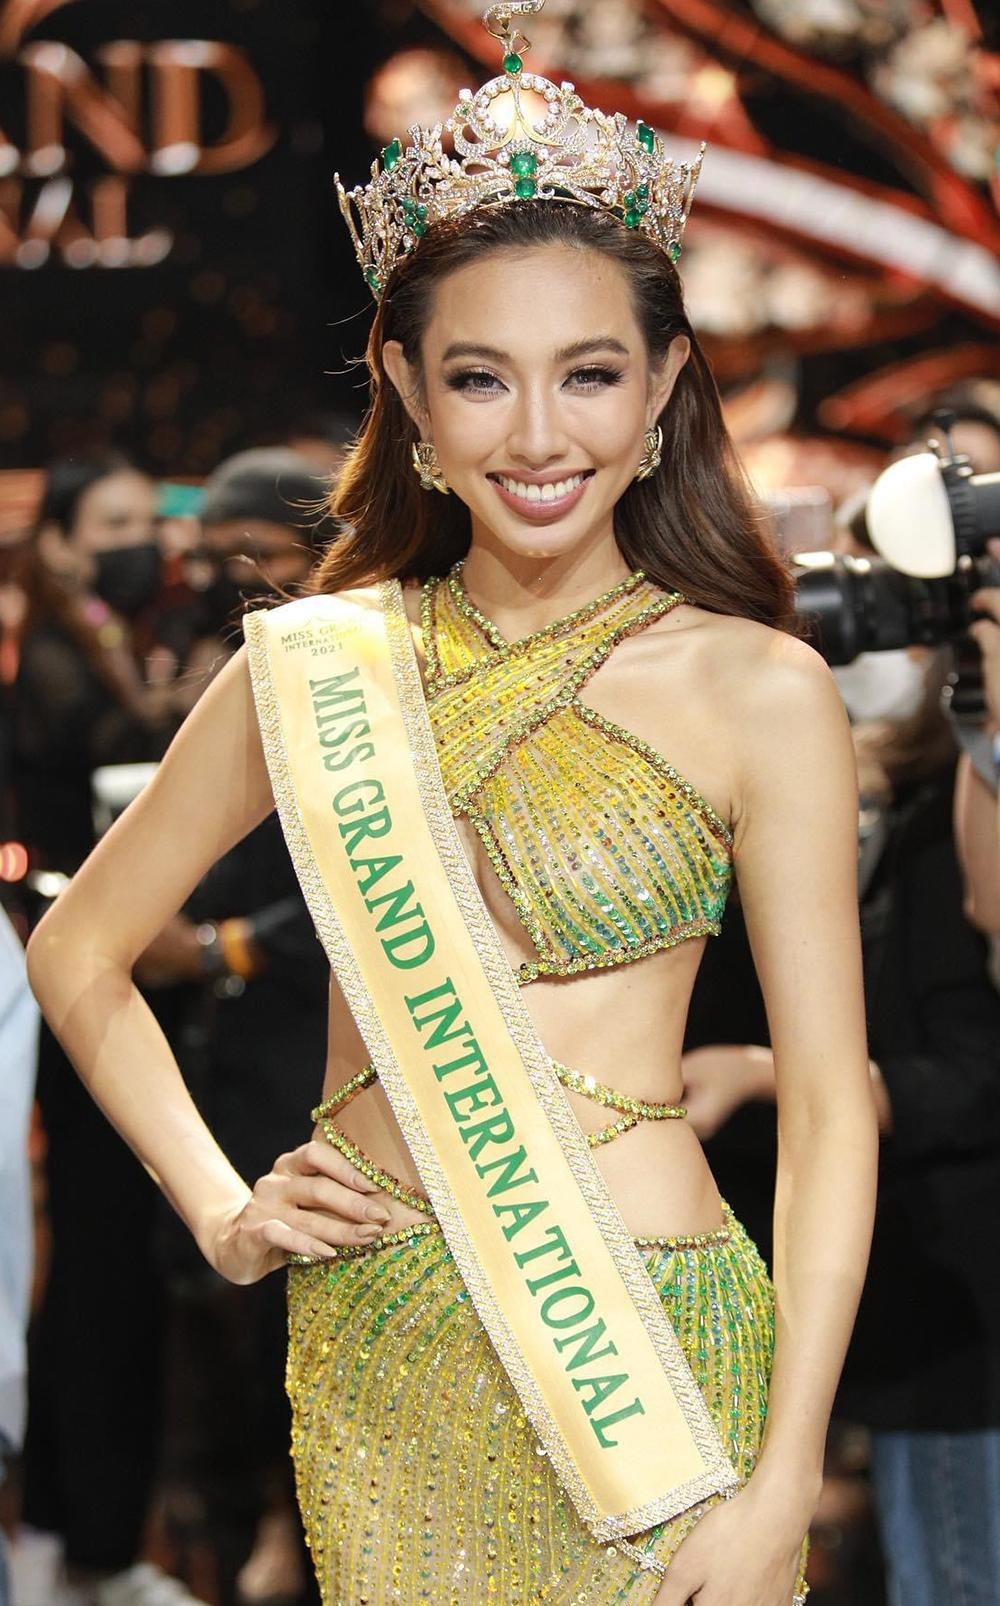 Nguyen Thuc Thuy Tien is crowned Miss Grand International 2021 in the ninth edition of the beauty pageant which concluded in Bangkok, Thailand, on December 4 last year.